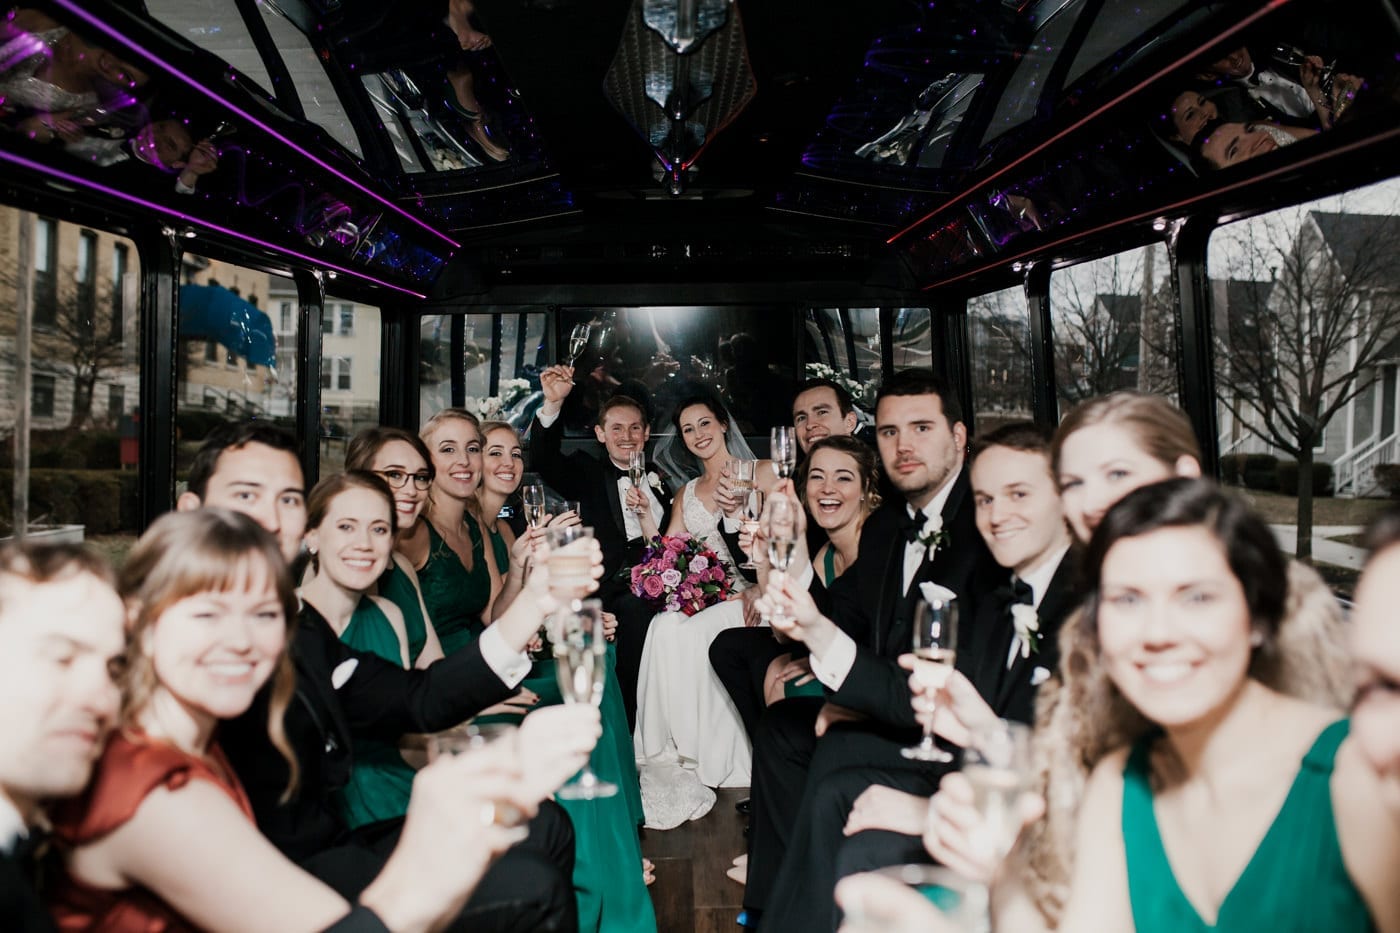 bride groom and bridal party on party buss at black tie winter wedding